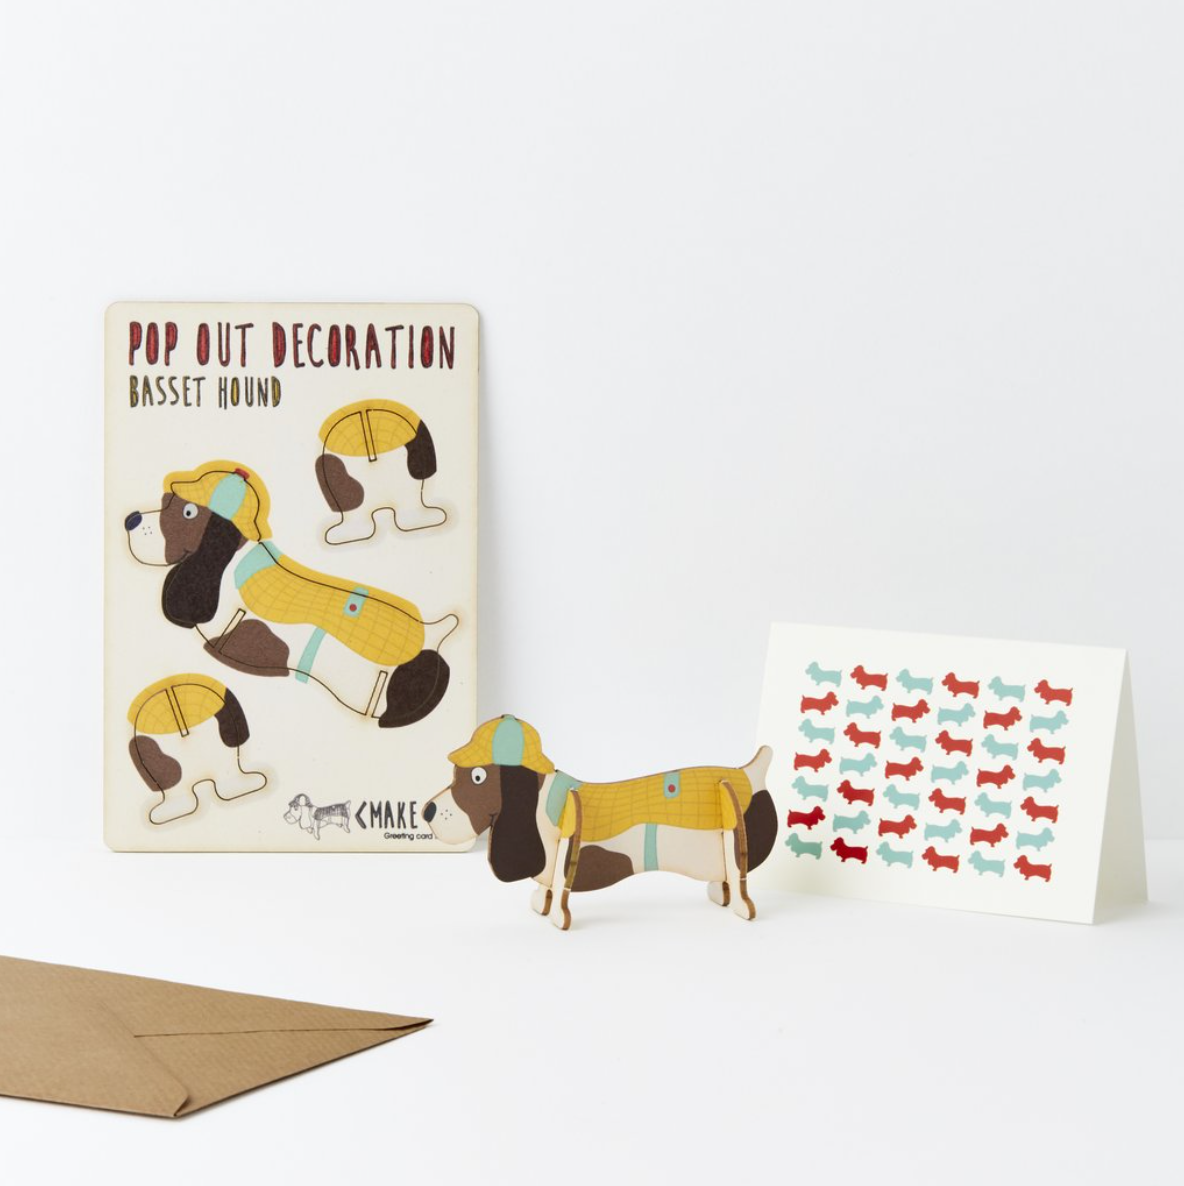 Basset Hound Pop Out Decoration and Card